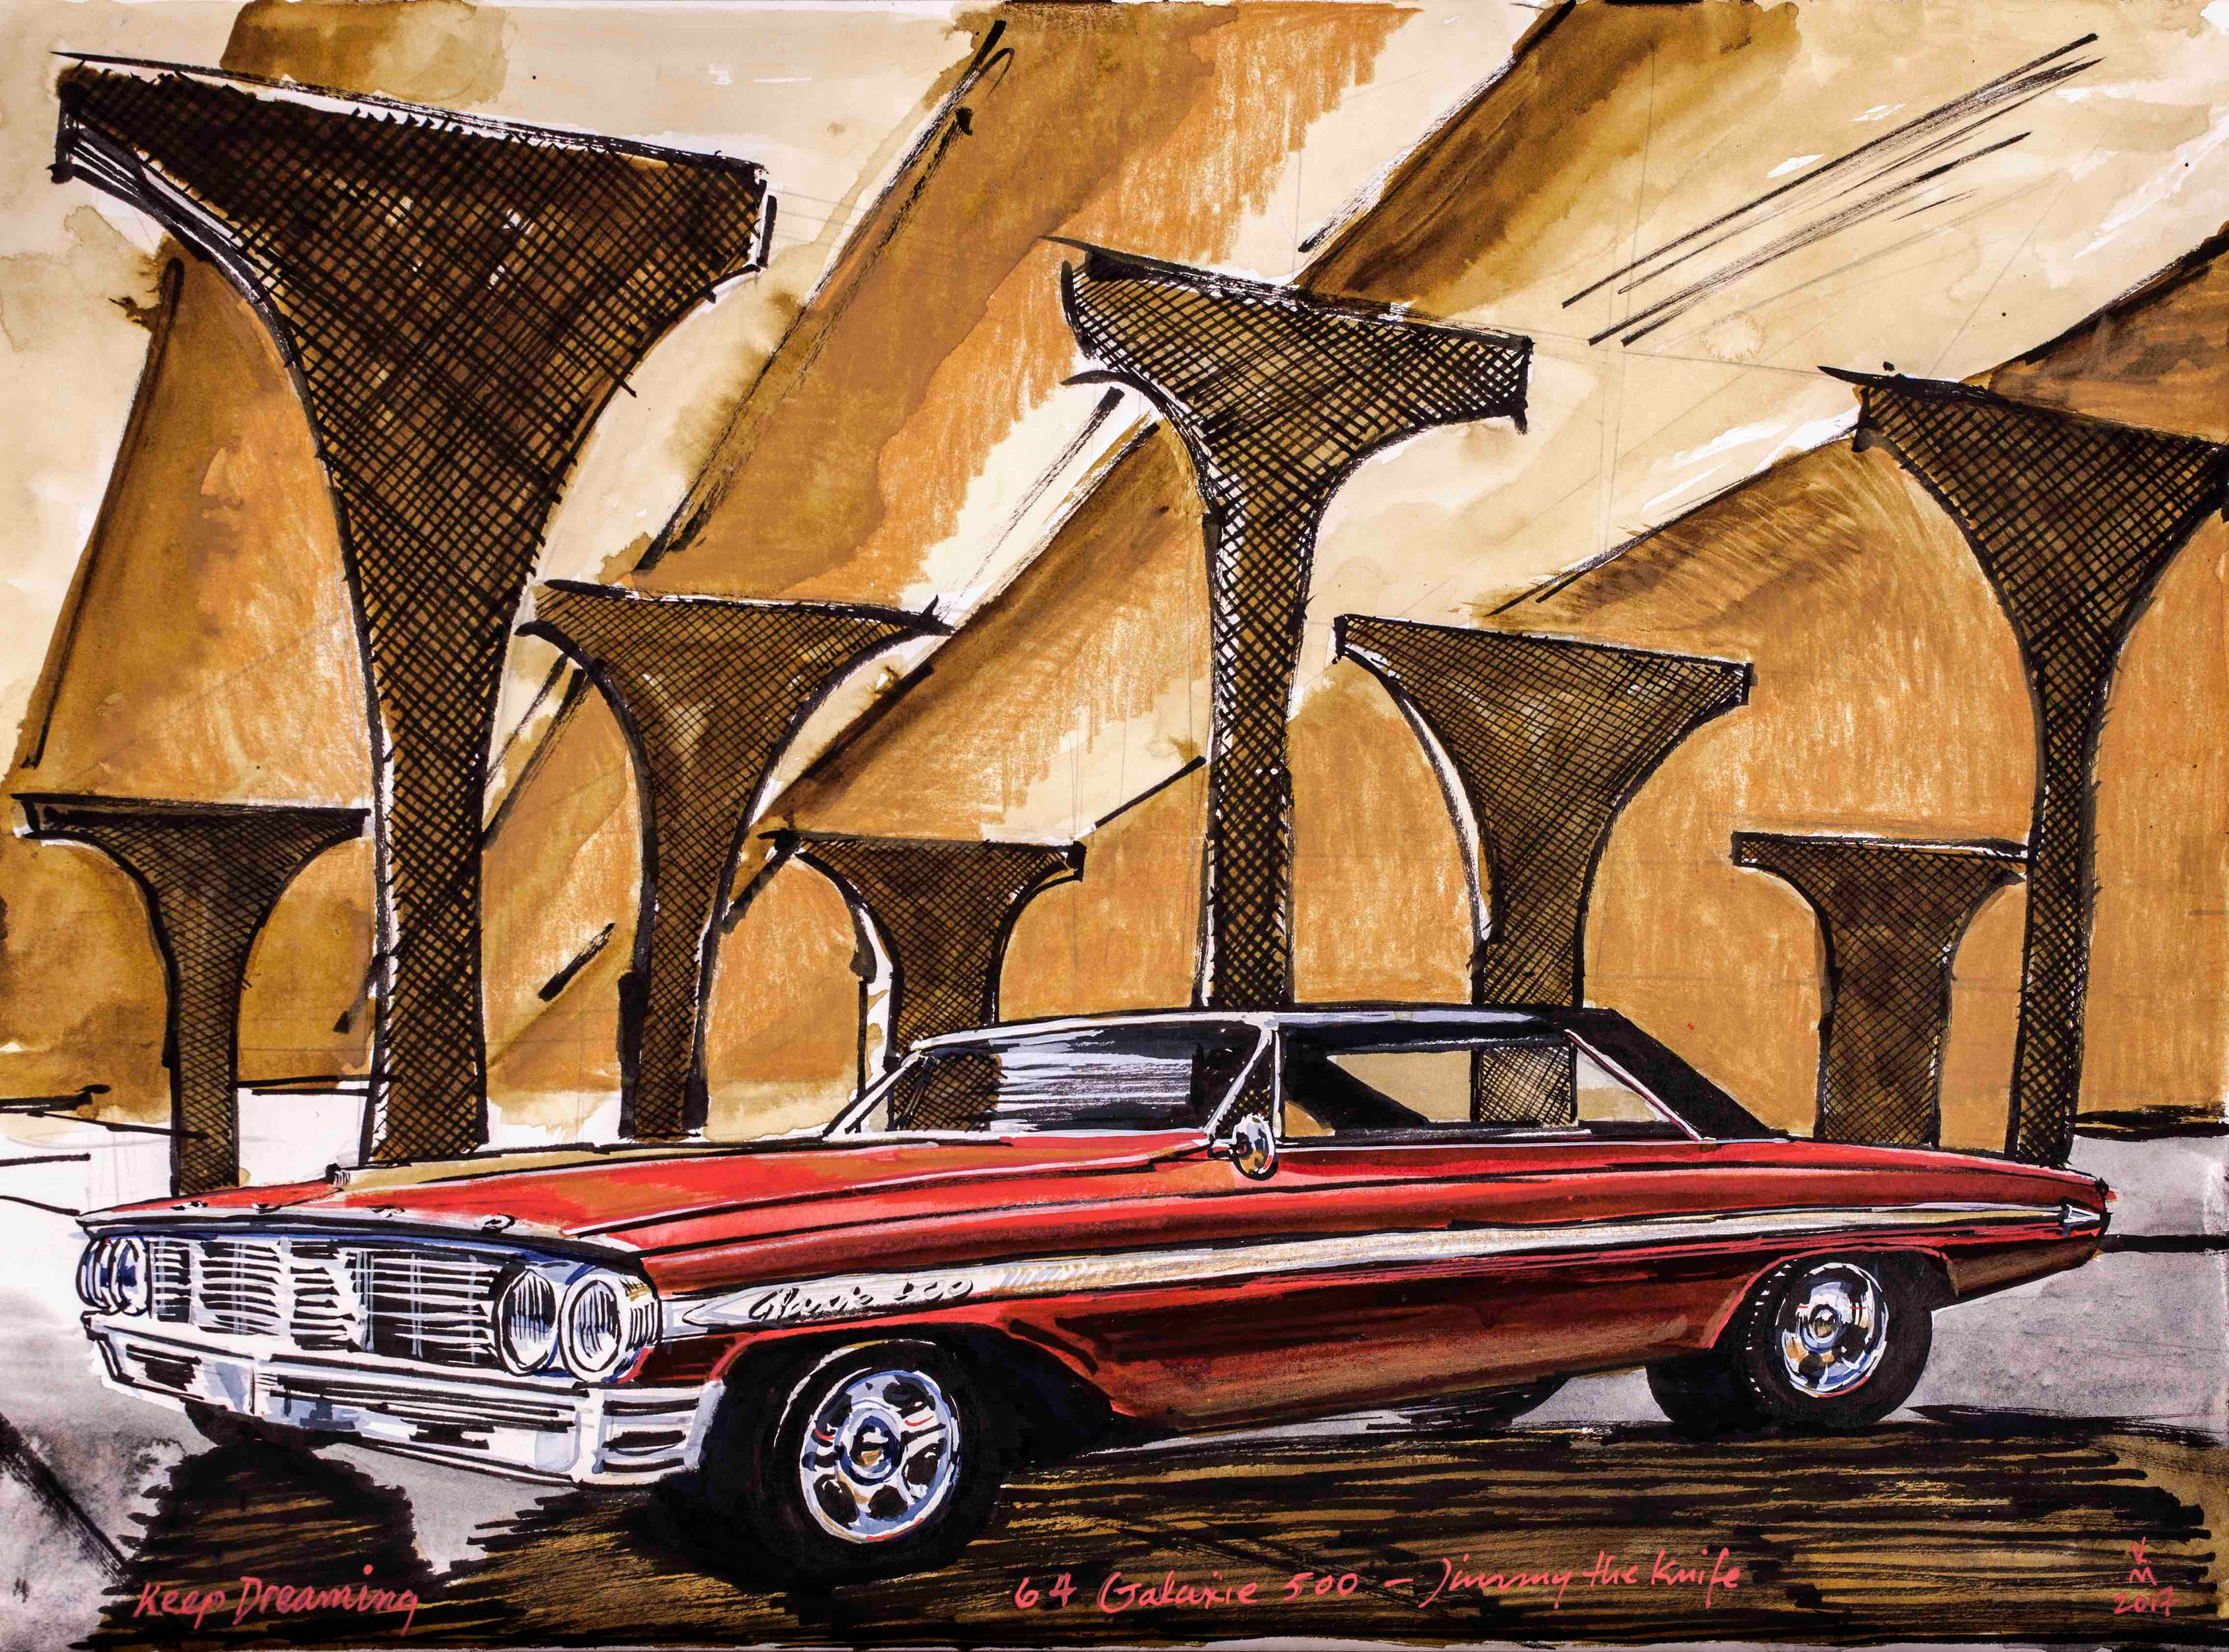 60's muscle, FORD Galaxie 500.